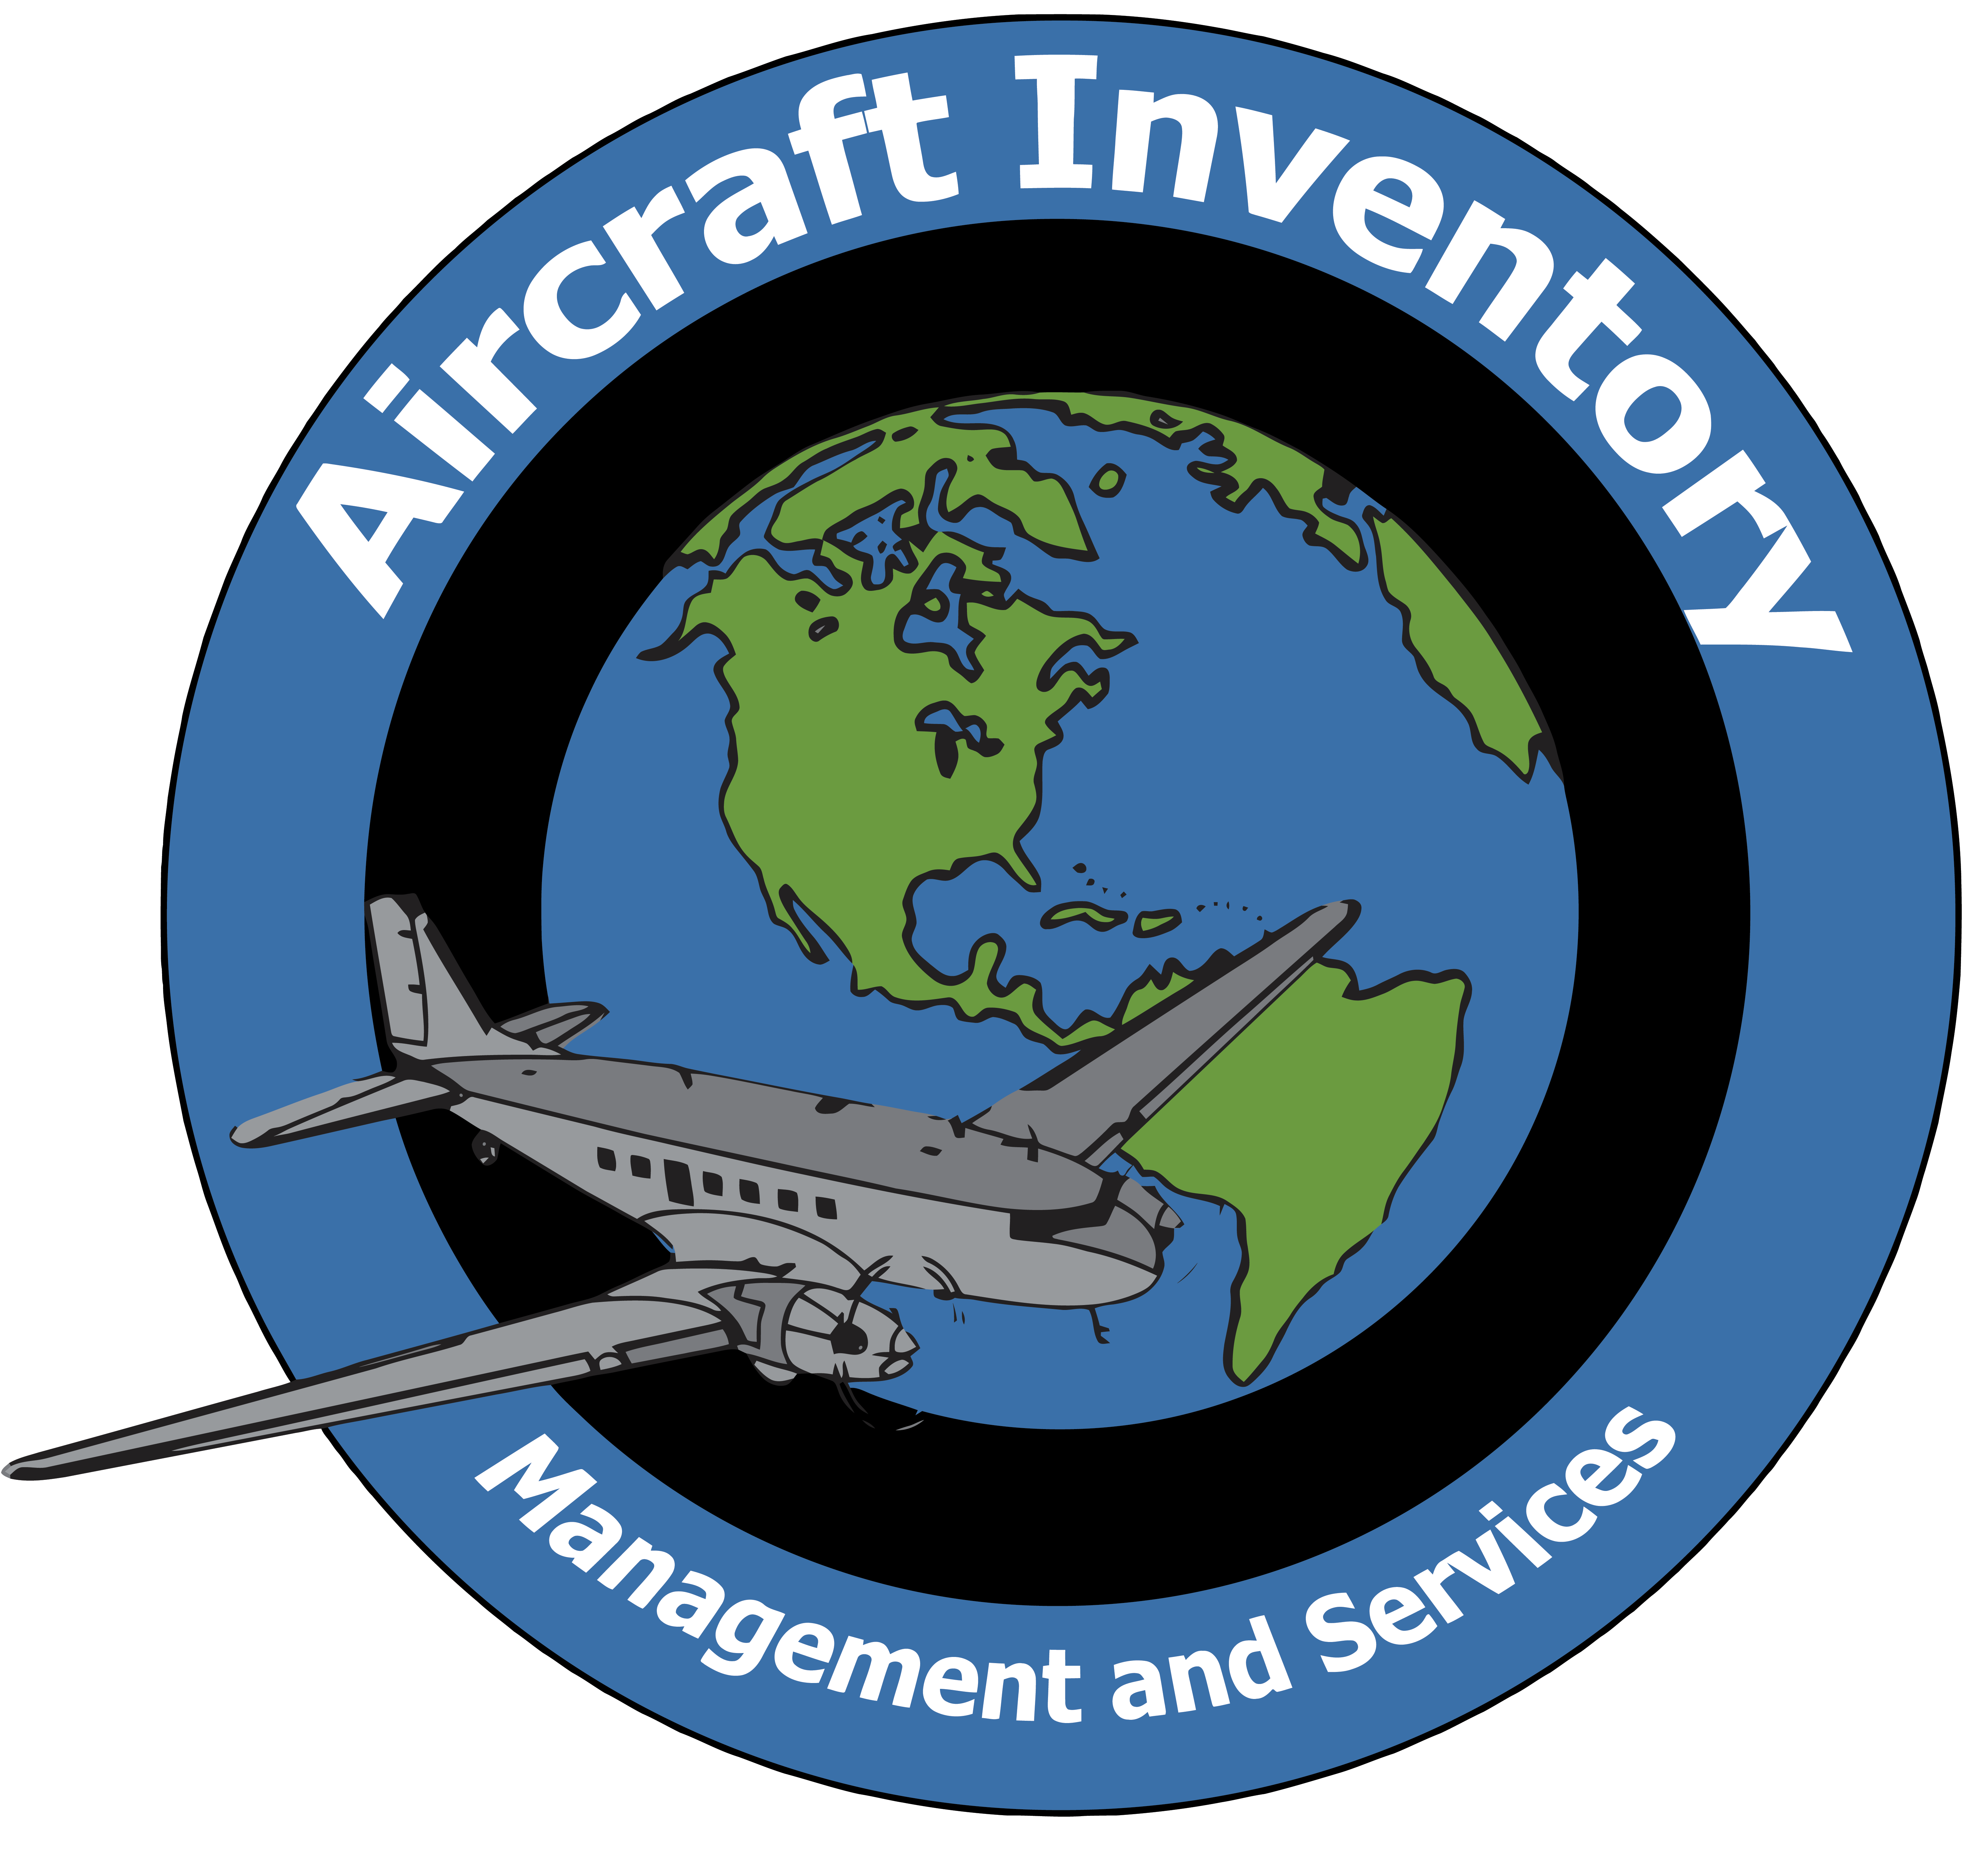 Aircraft Inventory Management and Services